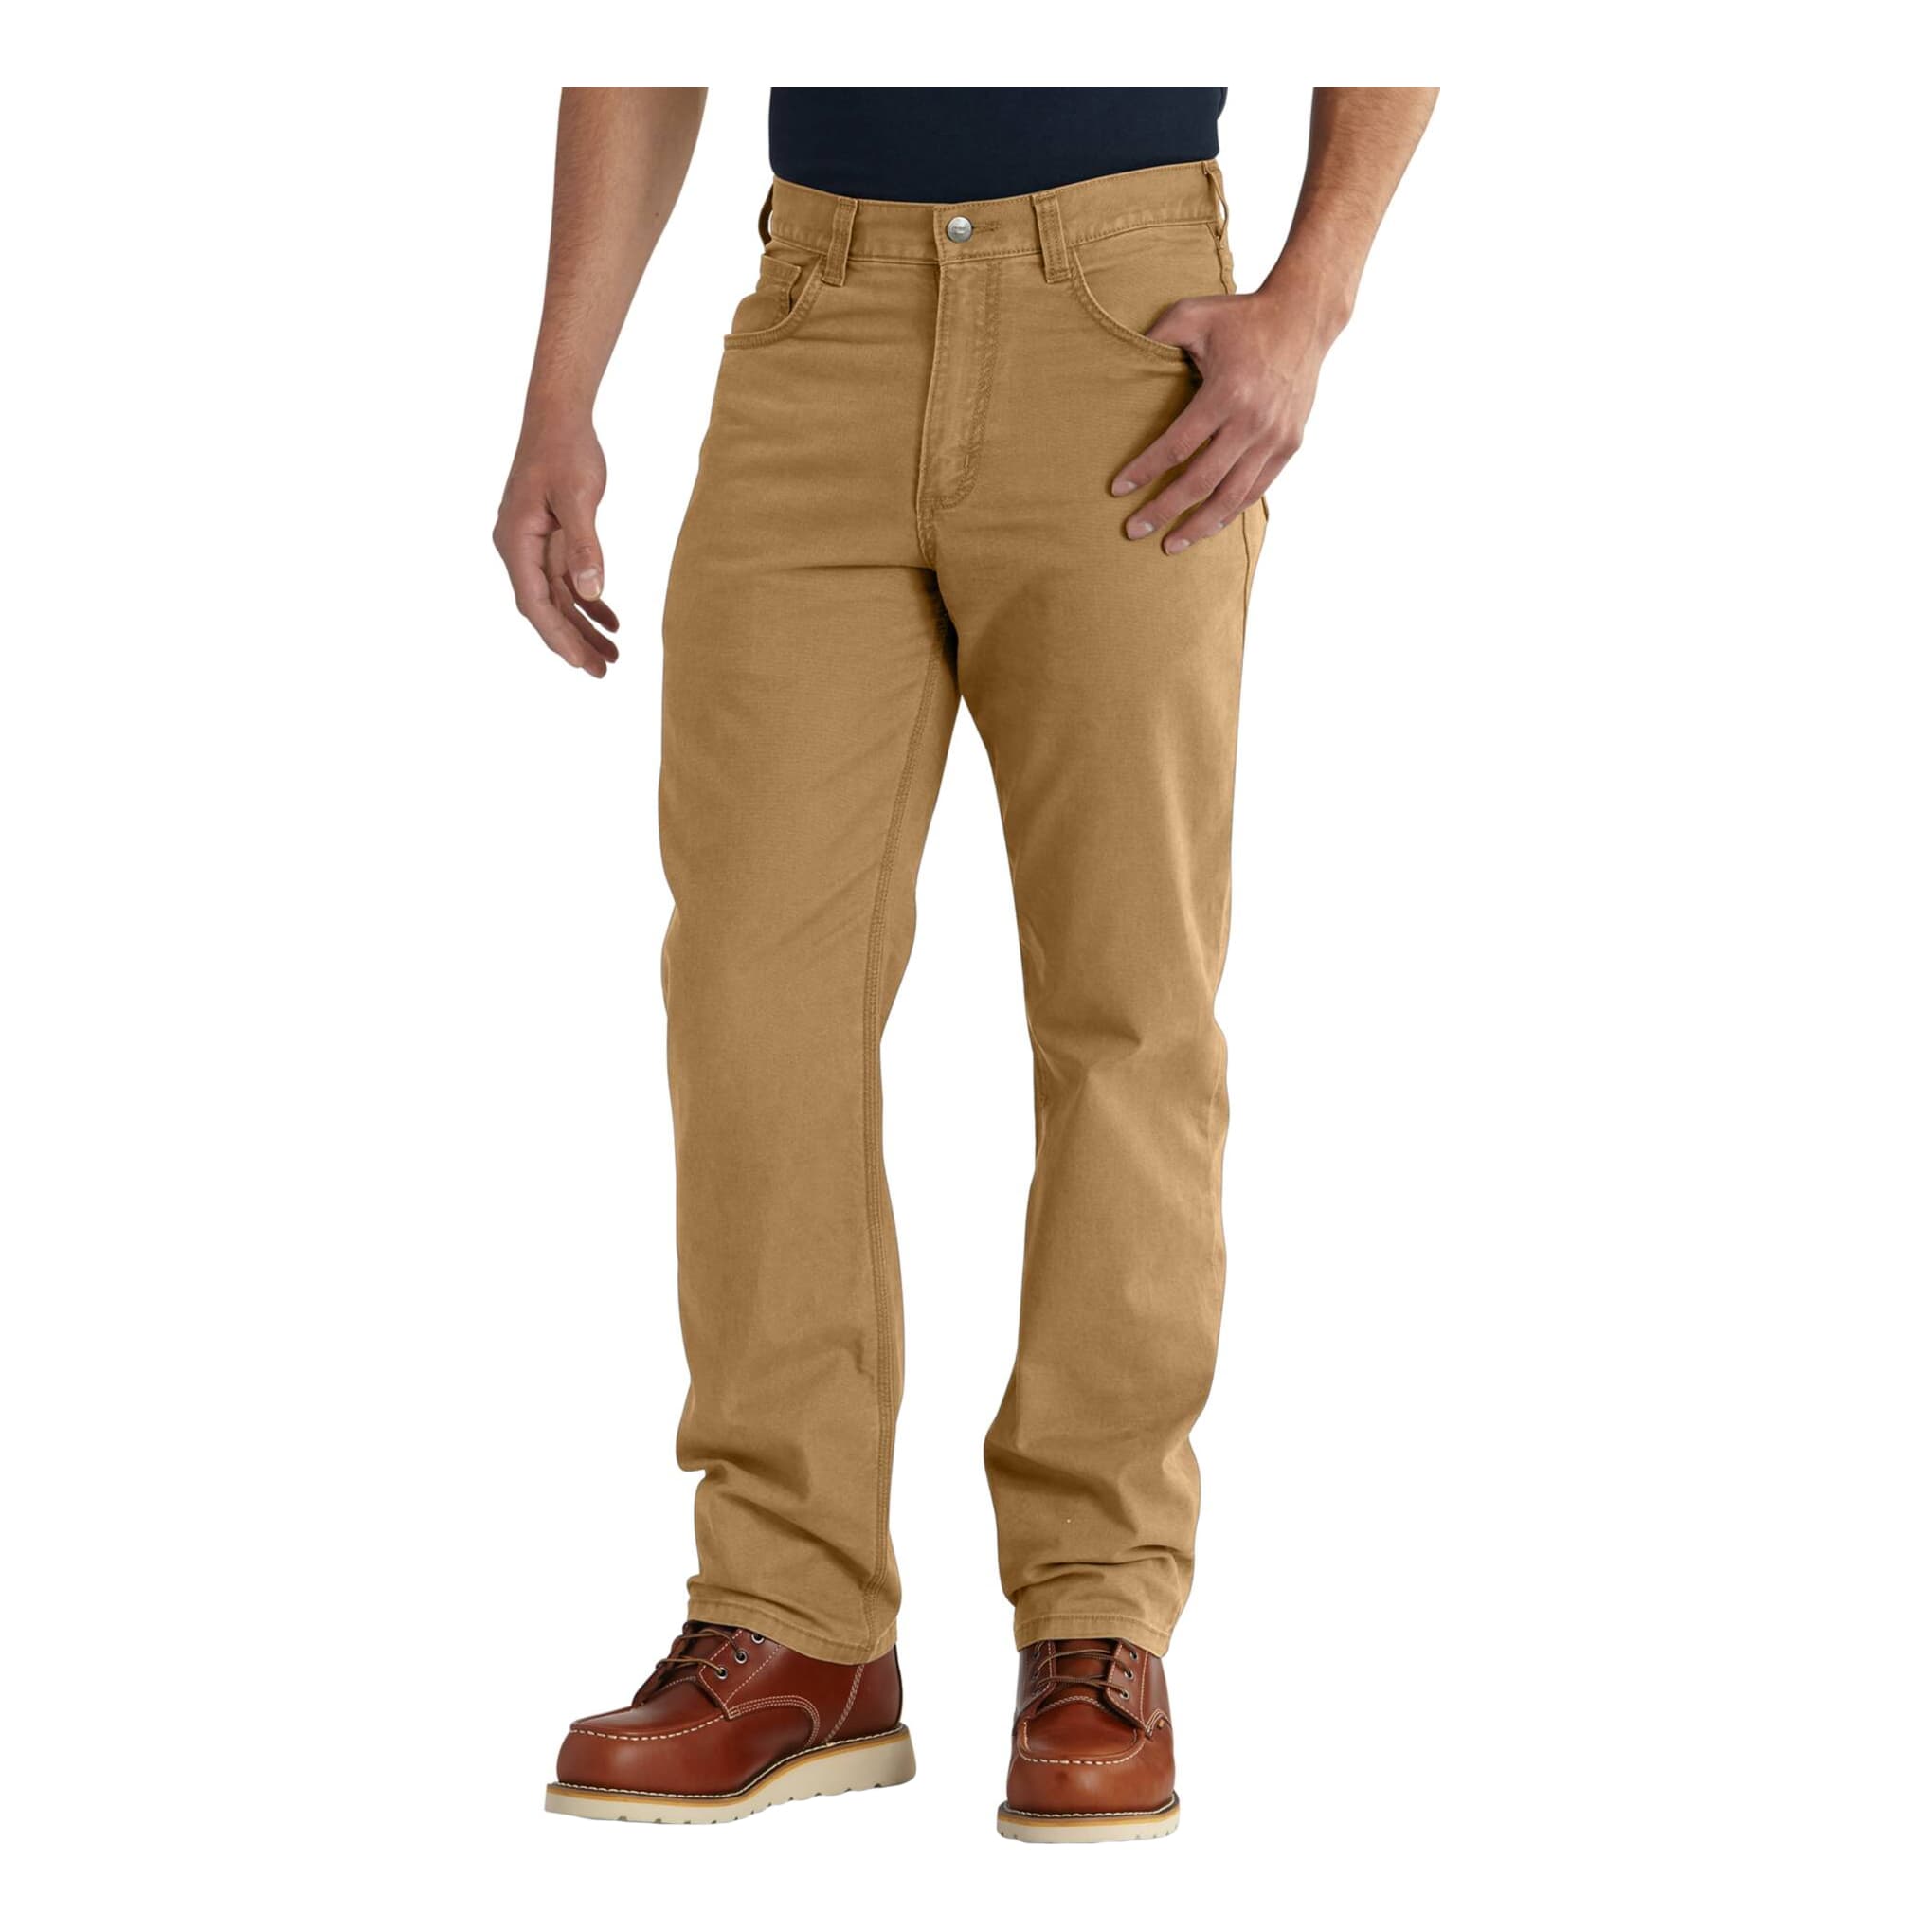 Buy Carhartt Men's Tall Base Force Mid Classic Pant by Carhartt